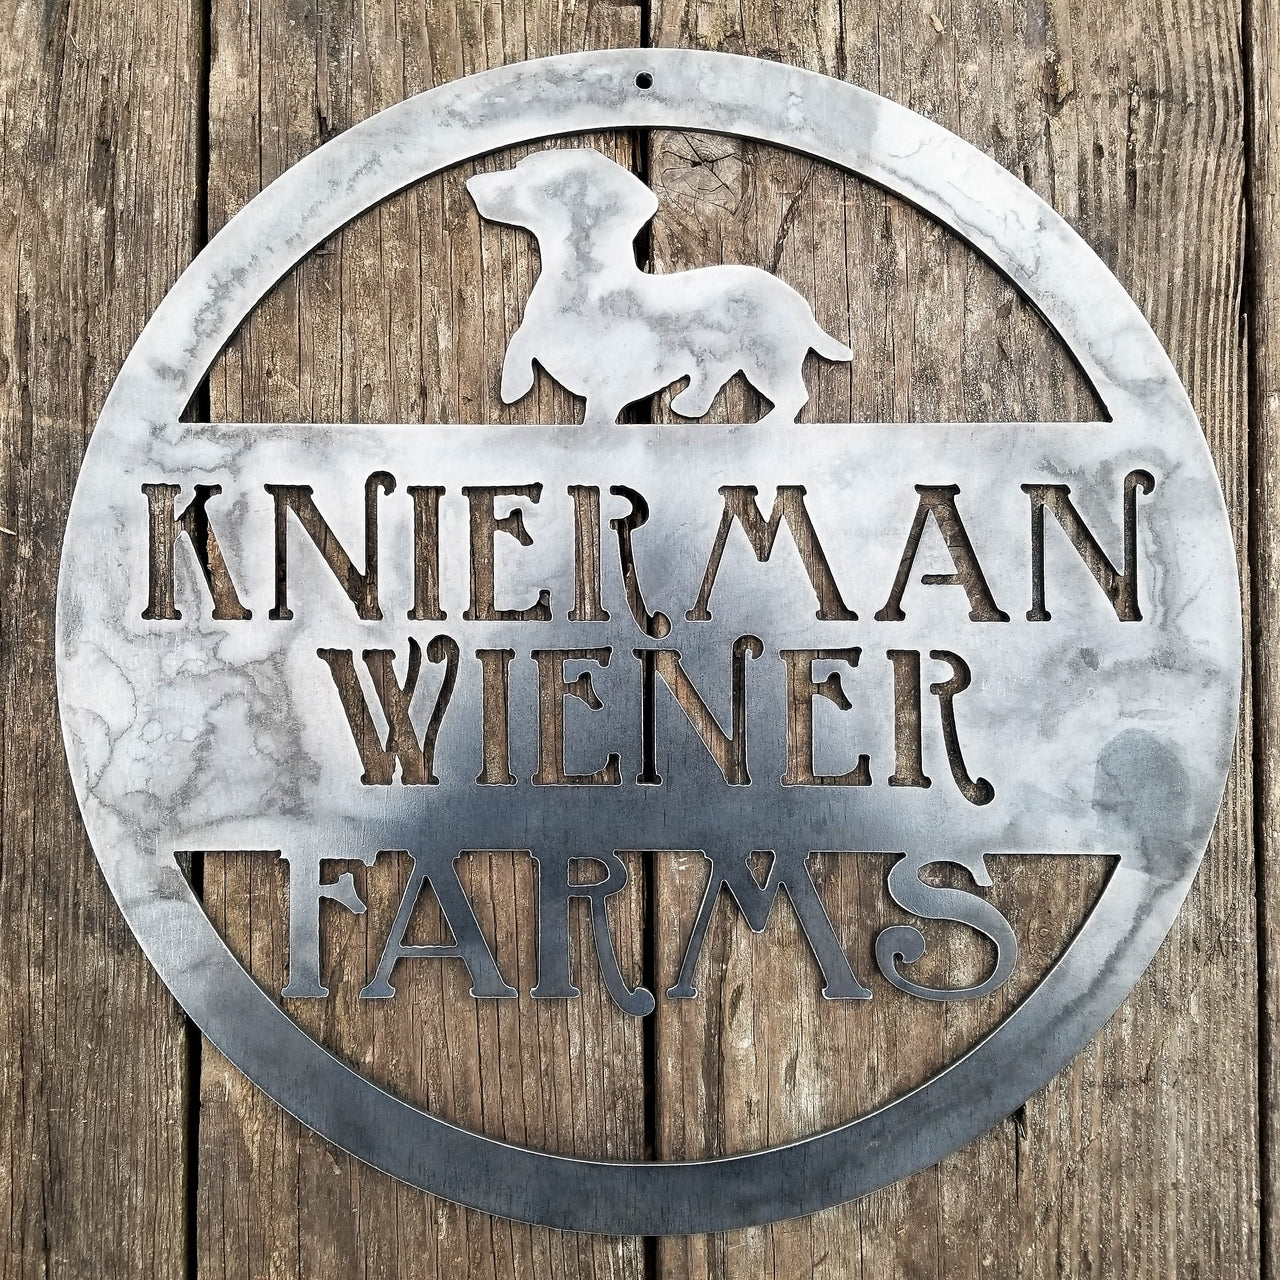 This is a custom round metal sign that features a wiener dog and reads from the top down, "Knierman Wiener Farms"